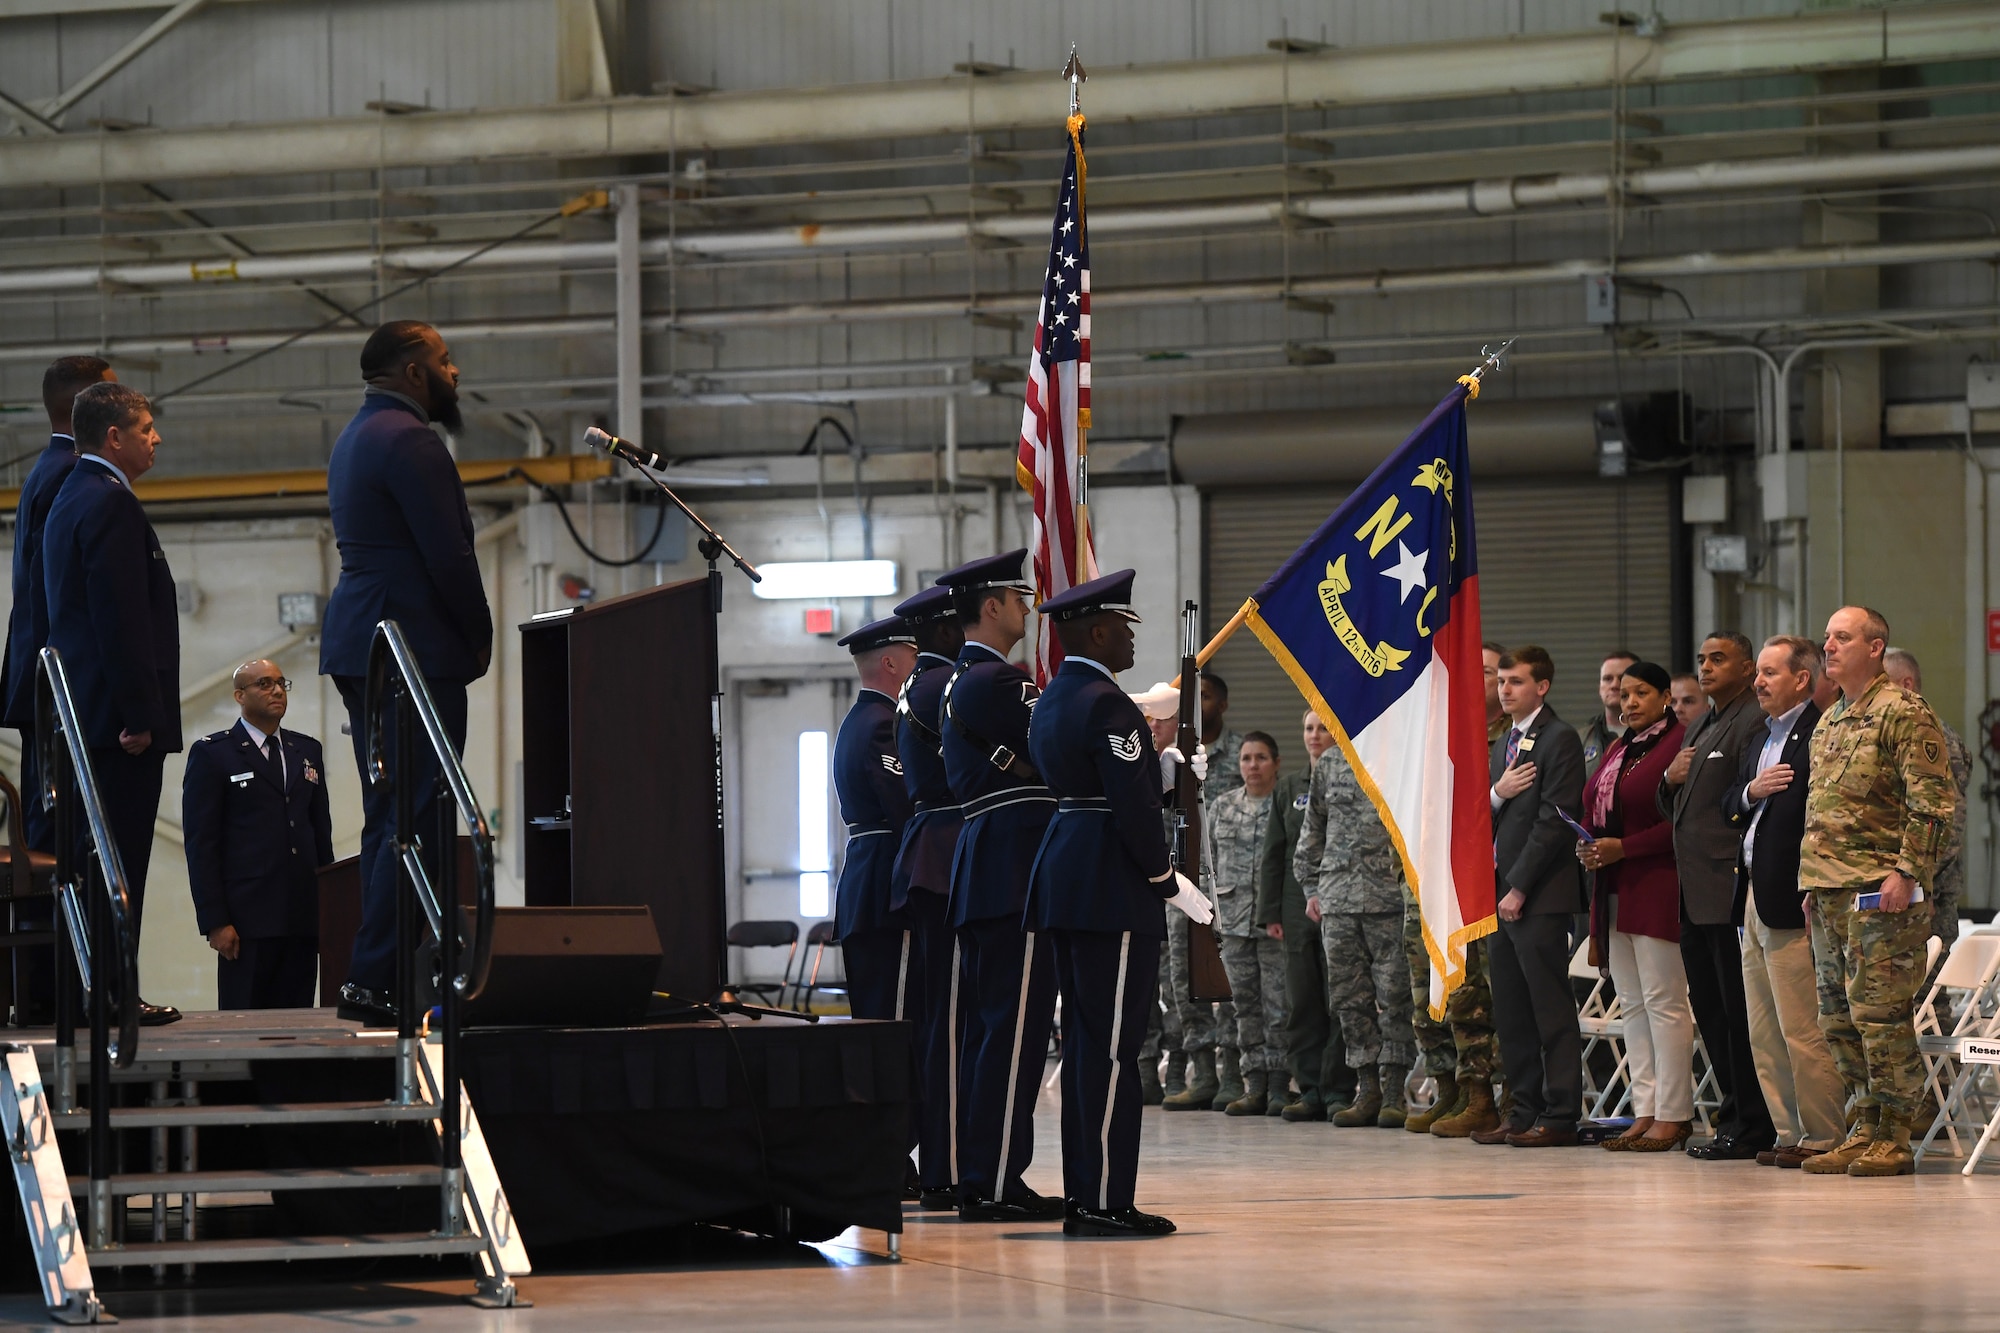 Chris Ervin sings the National Anthem during his father’s retirement ceremony, U.S. Air Force Brig. Gen. Clarence Ervin, at the North Carolina Air National Guard Base (NCANG), Charlotte Douglas International Airport, Feb. 09, 2019. Family, friends and guard members gathered to celebrate the retirement of Gen. Ervin, Chief of Staff for the NCANG, after serving in the military for 37 years.